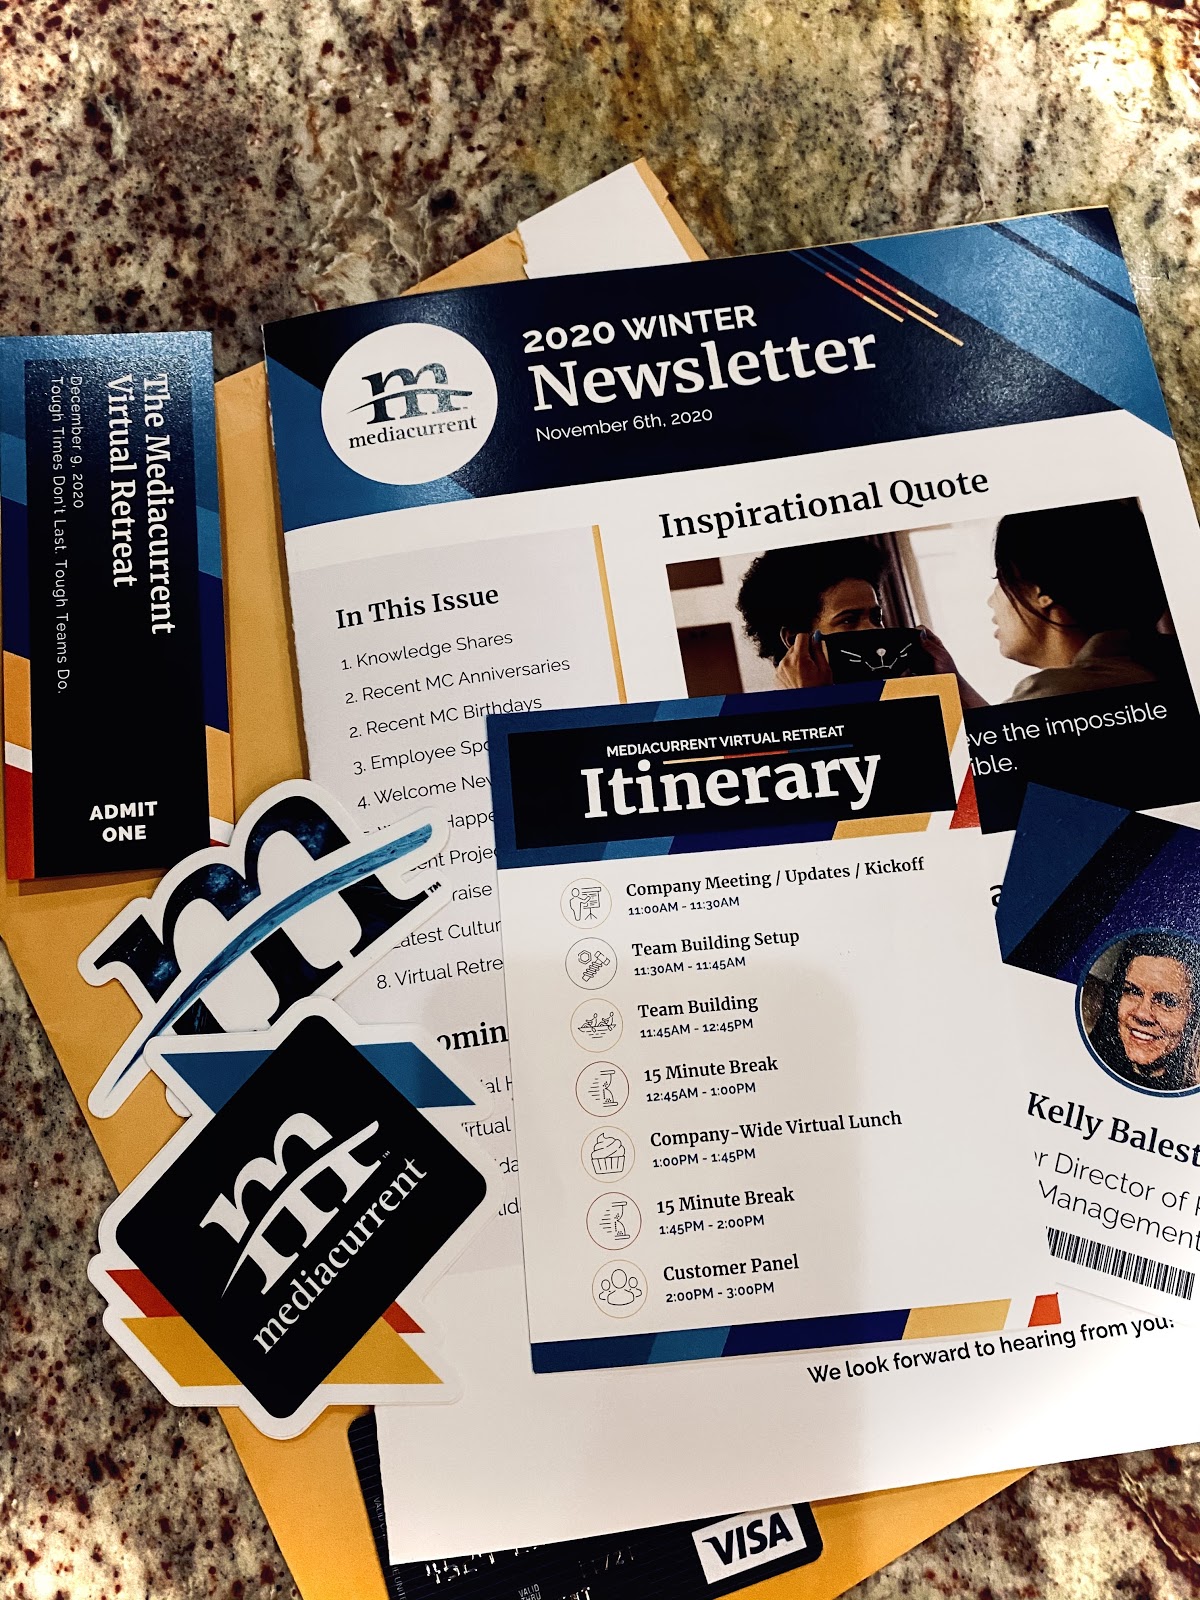 pre-event retreat mailer with Mediacurrent branded print materials, including stickers and a copy of the company newsletter 